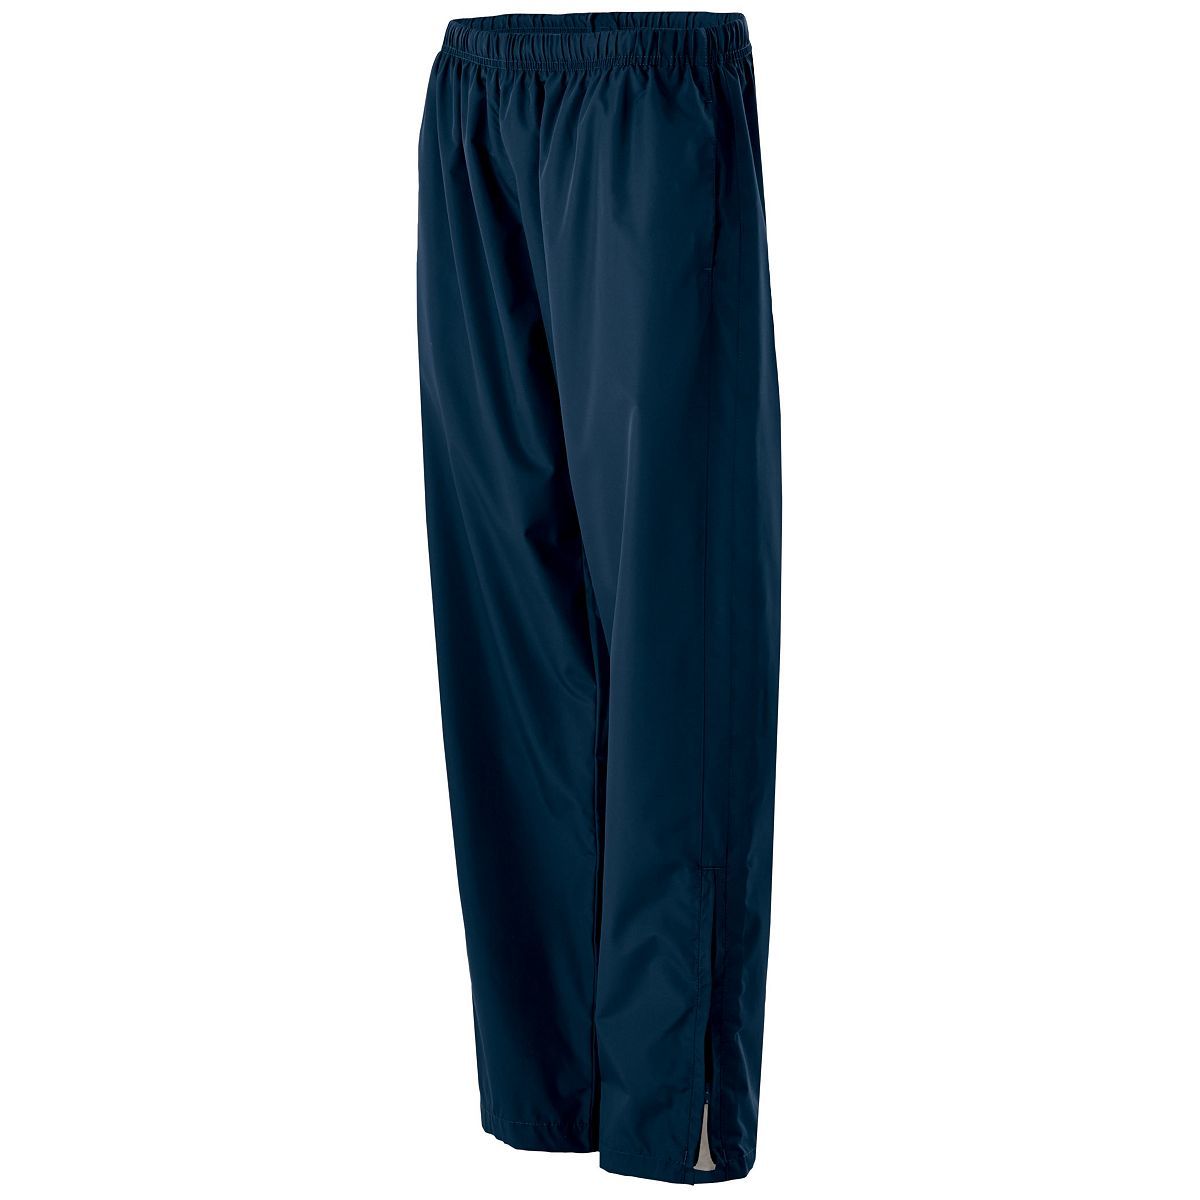 Holloway Sable Pant in Navy/Navy  -Part of the Adult, Adult-Pants, Pants, Holloway product lines at KanaleyCreations.com